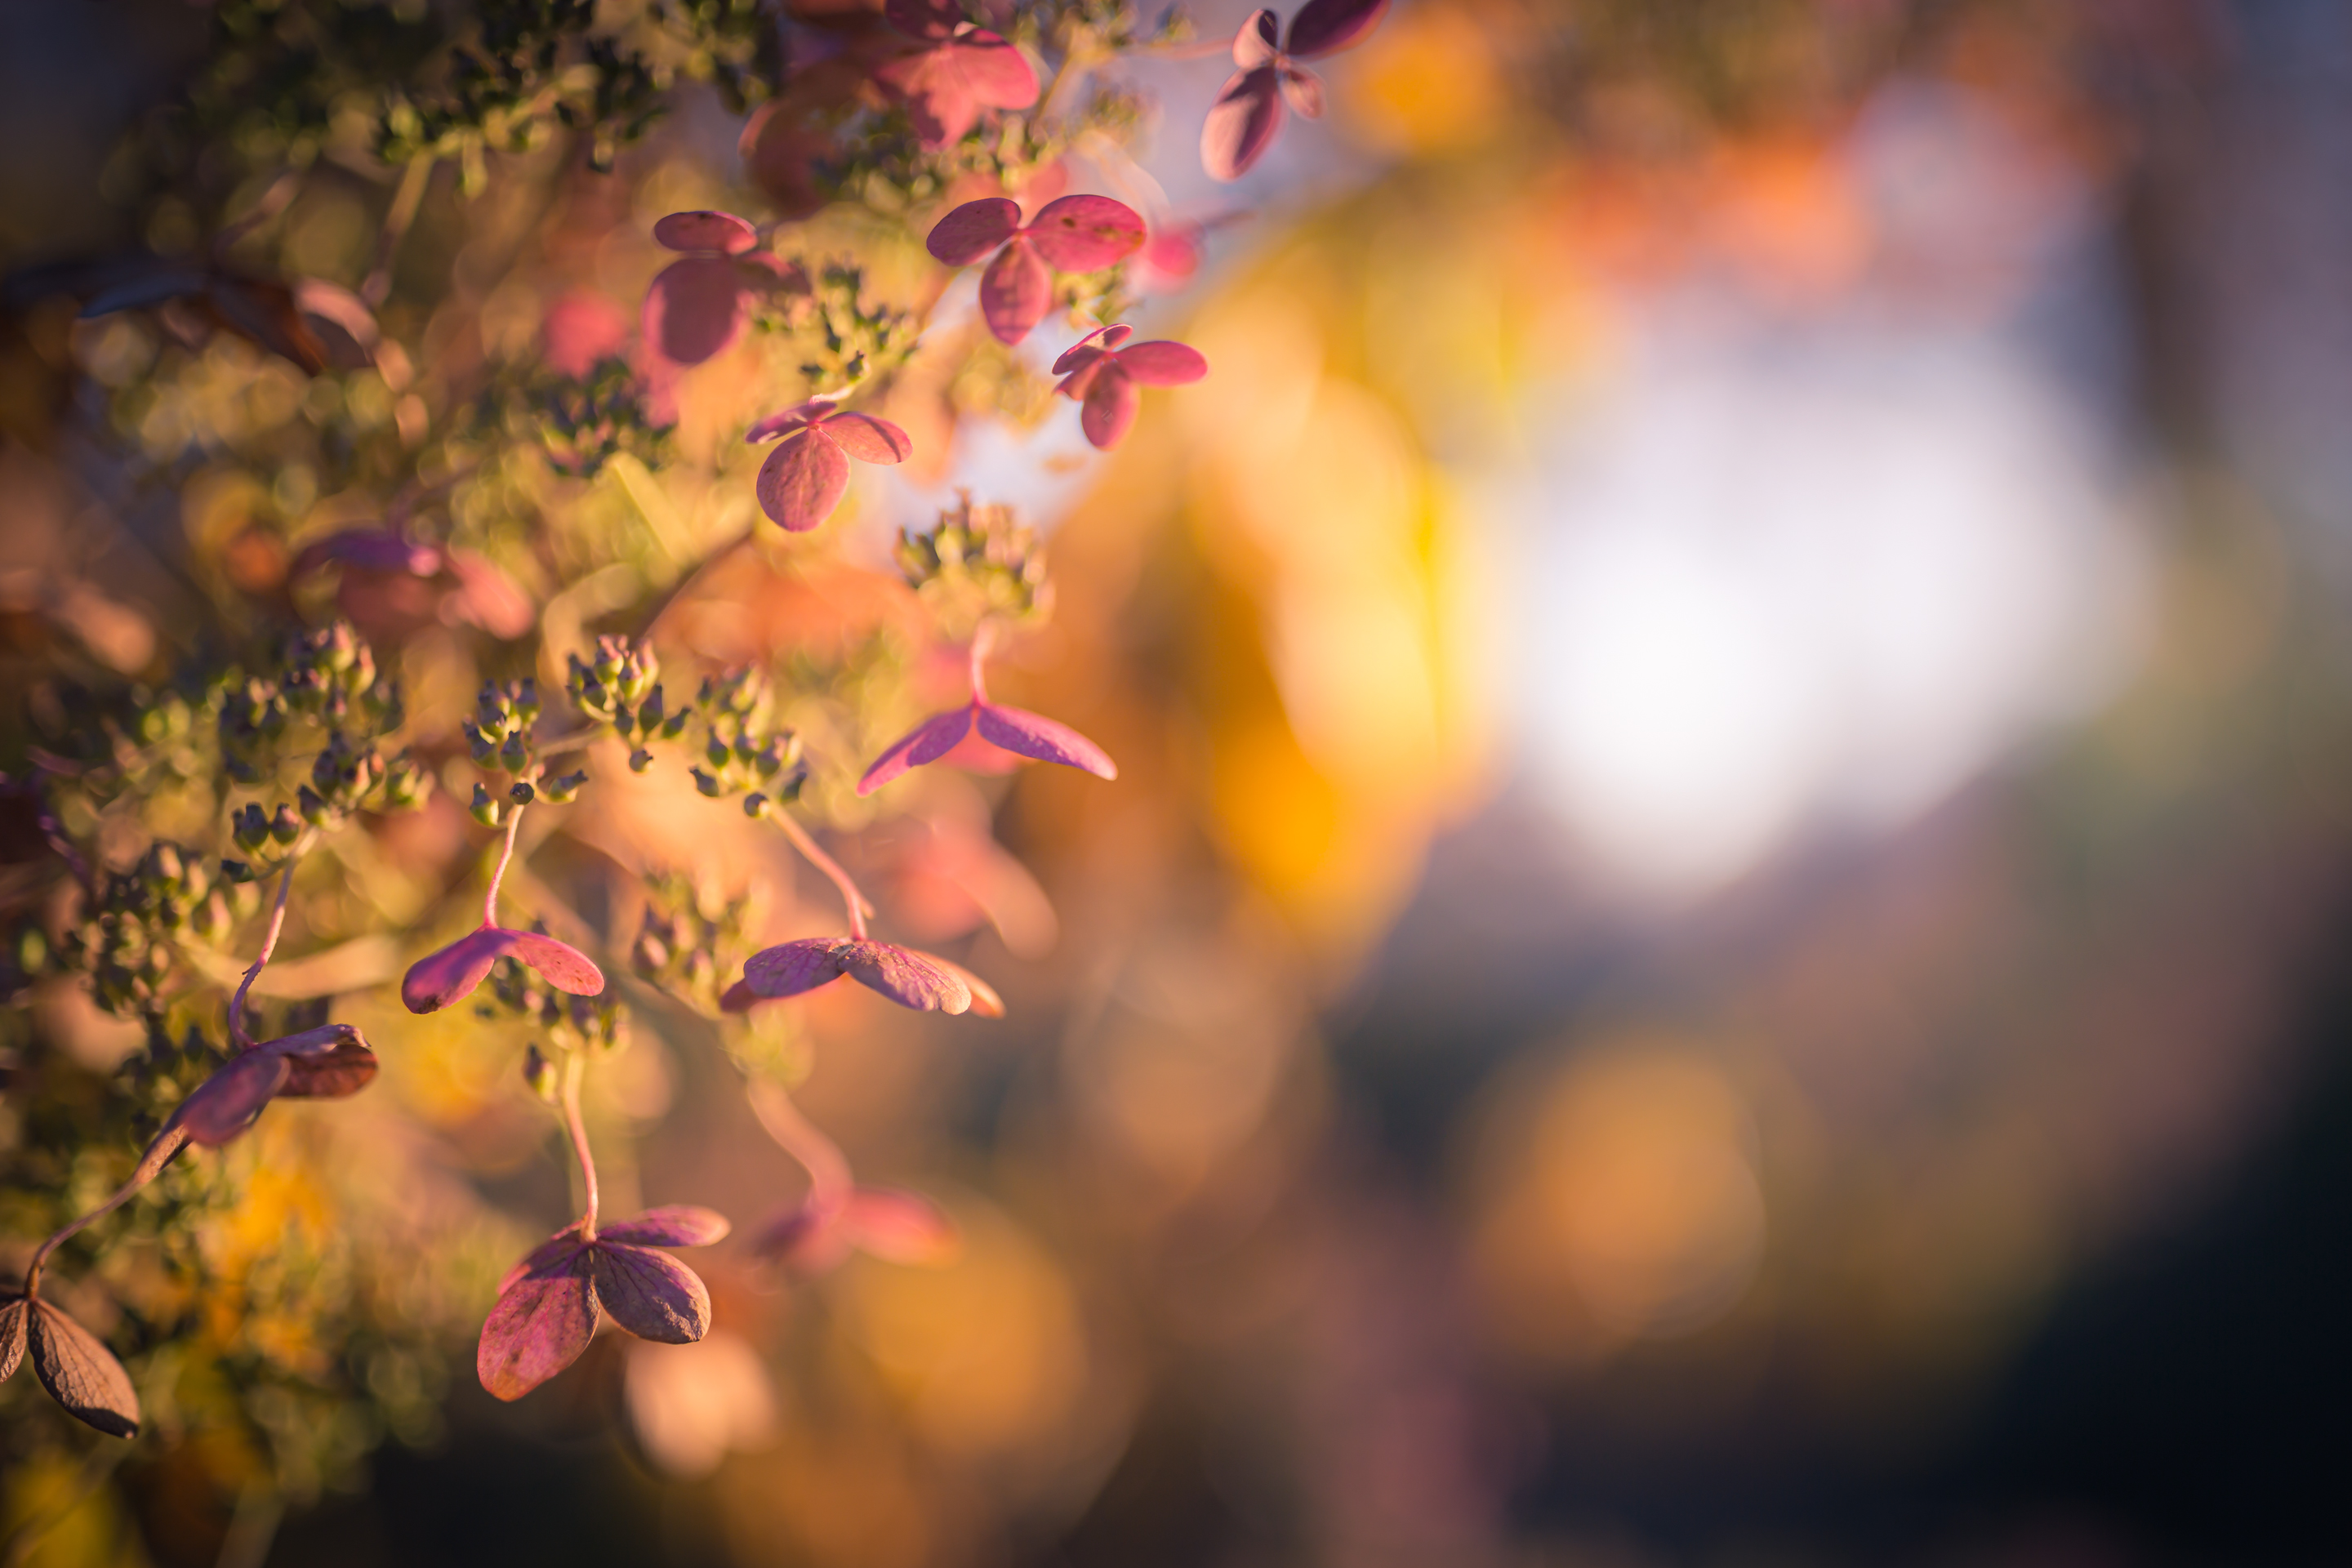 35mm photo of a quick fire hydrangea bathed in rich golden light. The autumn pinks, yellows, and oranges of the flowering bush explode in a panoply of autumn color backdropped by smooth bokeh.